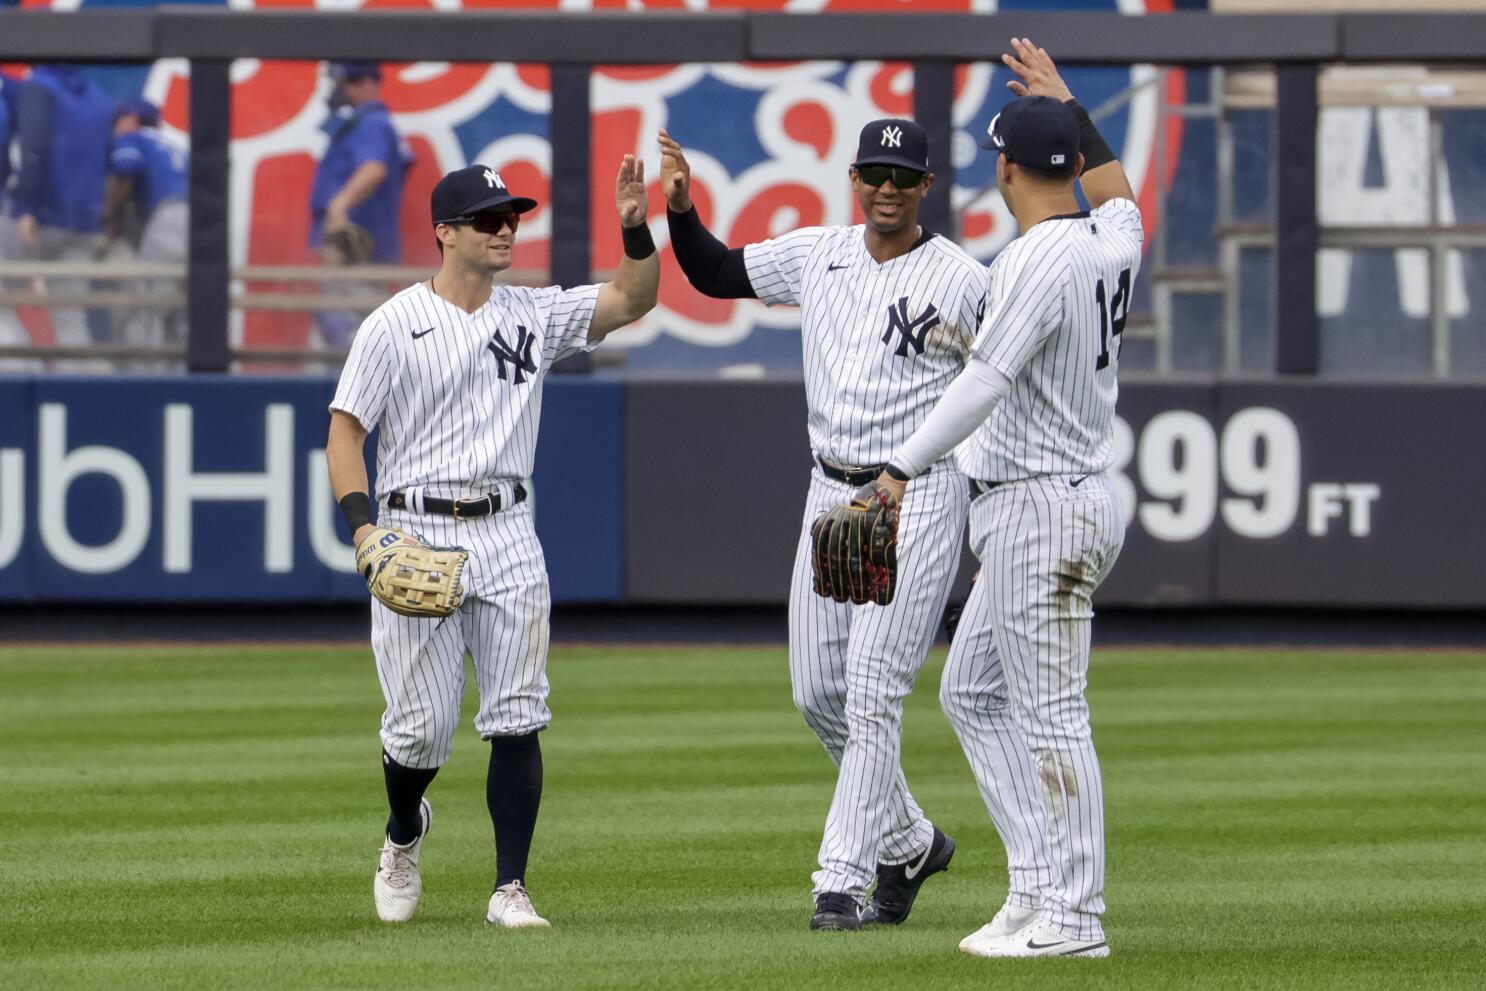 New York Yankees: 3 Major takeaways from the Yankees third loss in a row